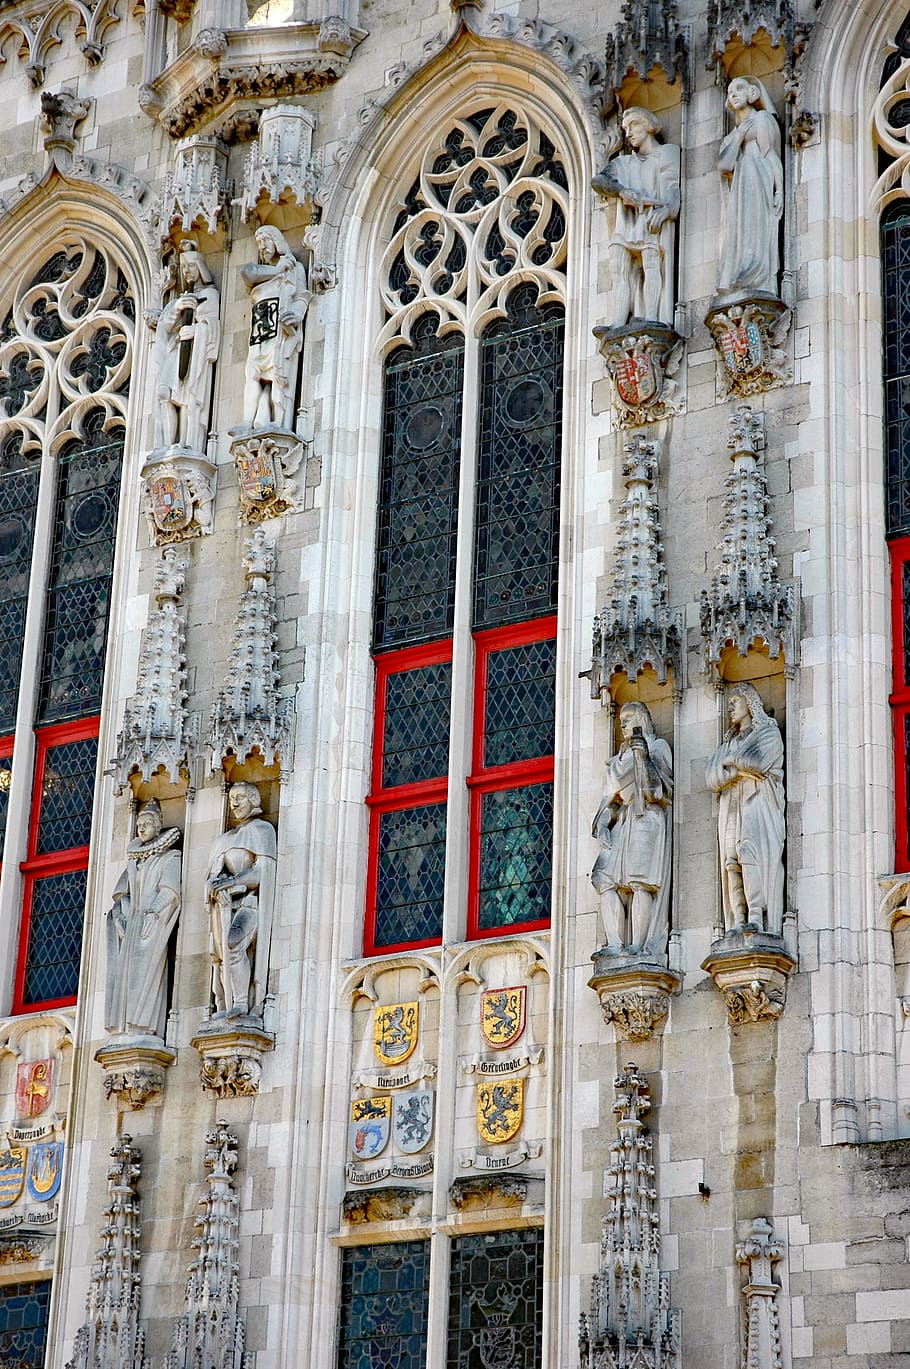 belgium 2015, stadhuis, bruges 1376-1420, historically, places of interest, facade, historic center, building, architecture, religion